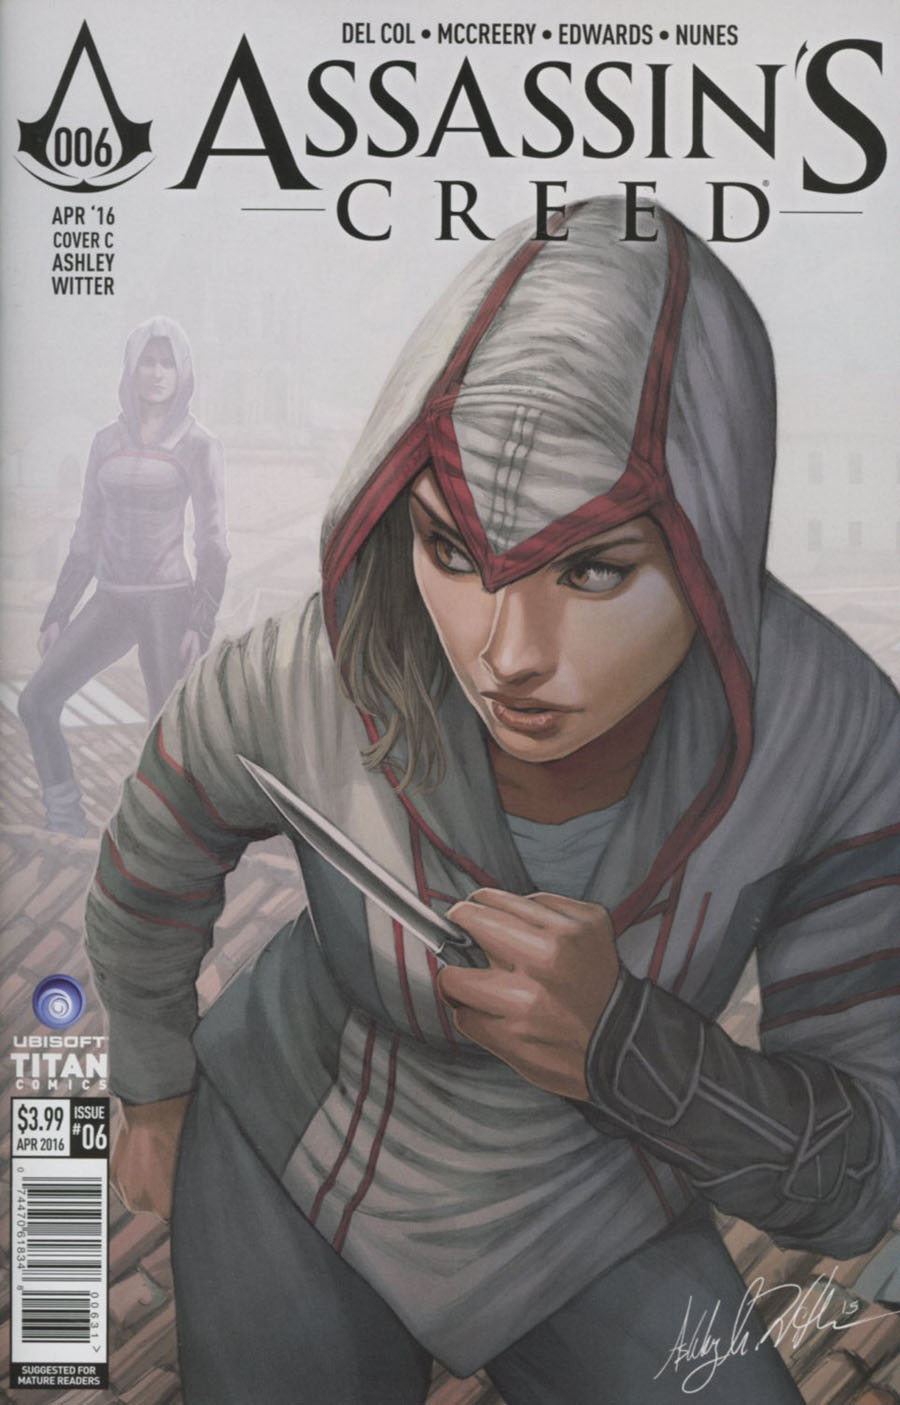 Assassins Creed #6 Cover C Variant Ashley Witter Cover